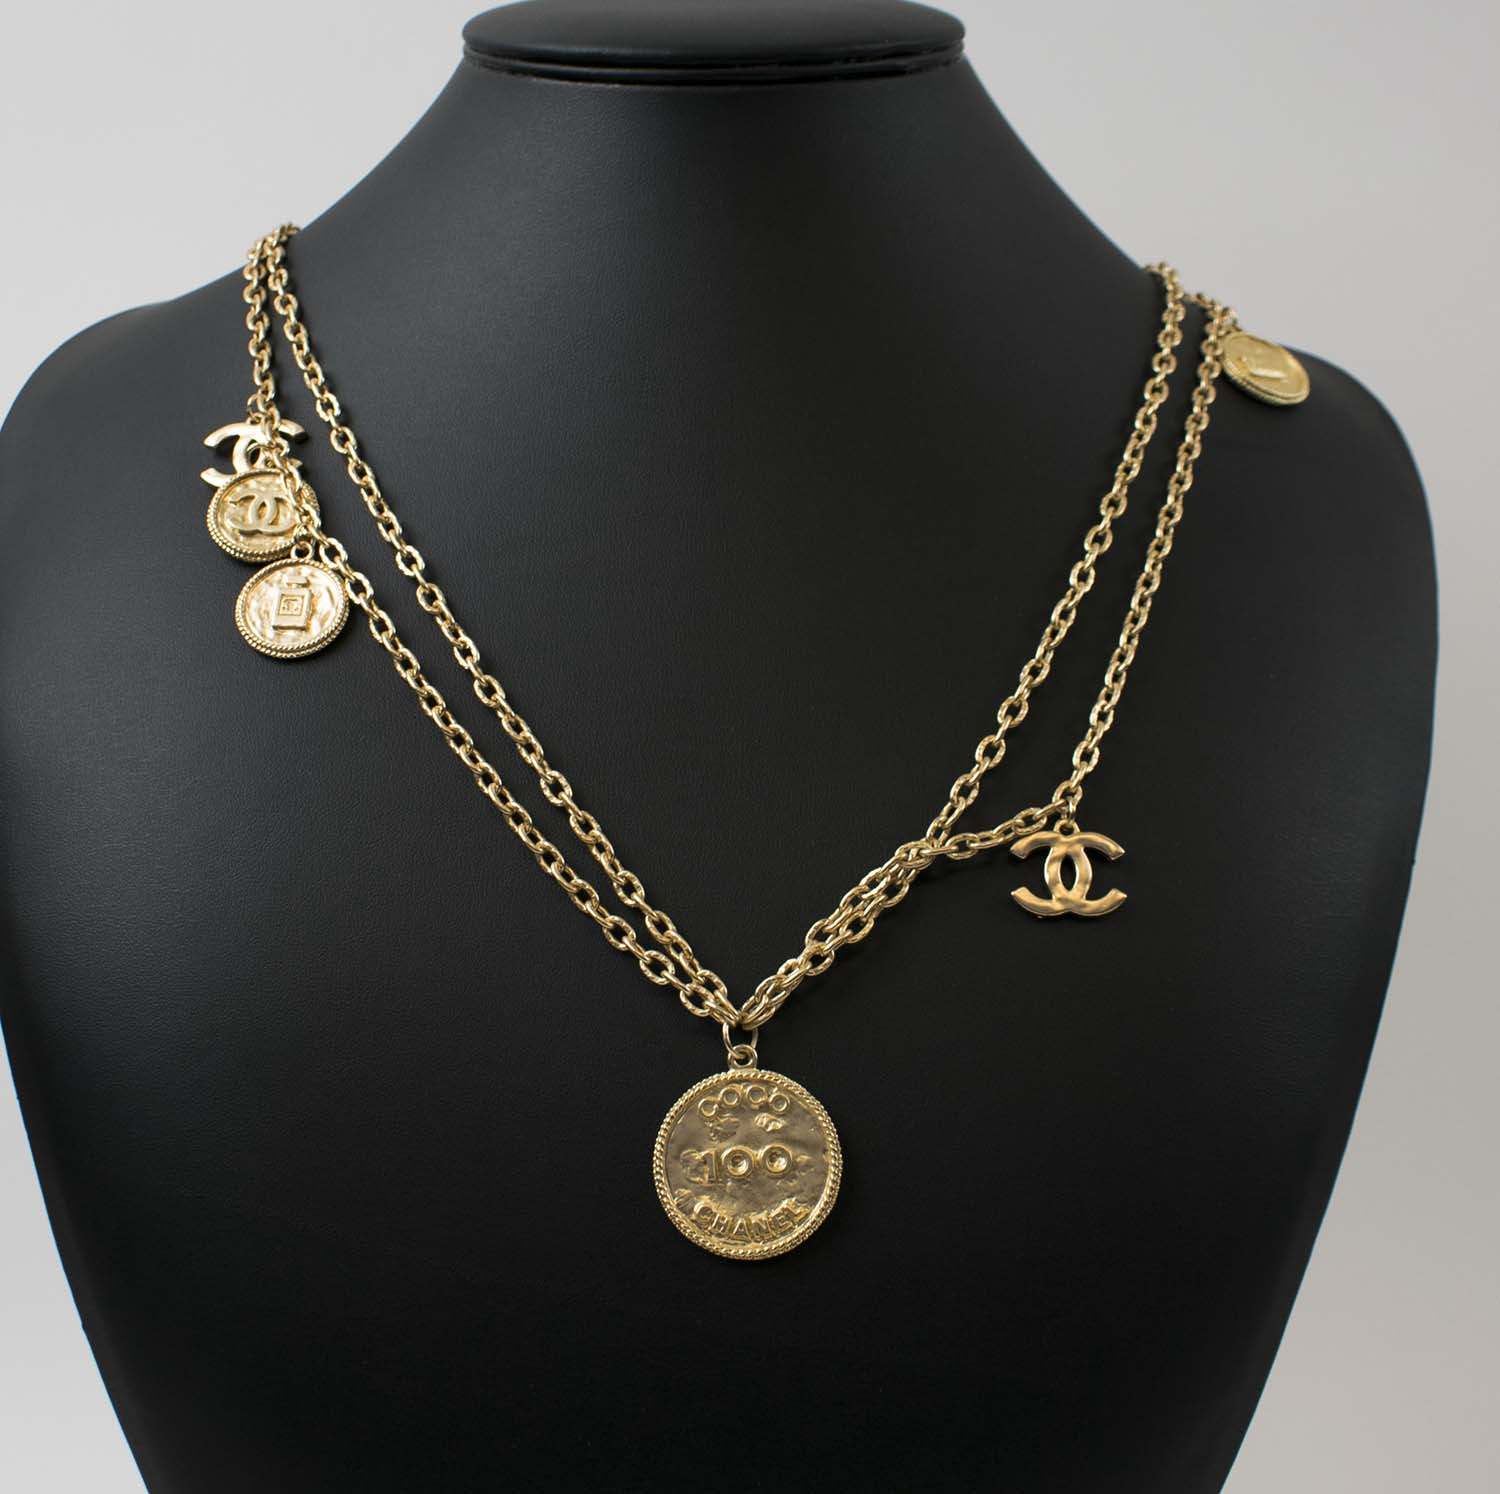 CHANEL 'COIN' NECKLACE, gold tone, plus a pair of matching earrings. (3)